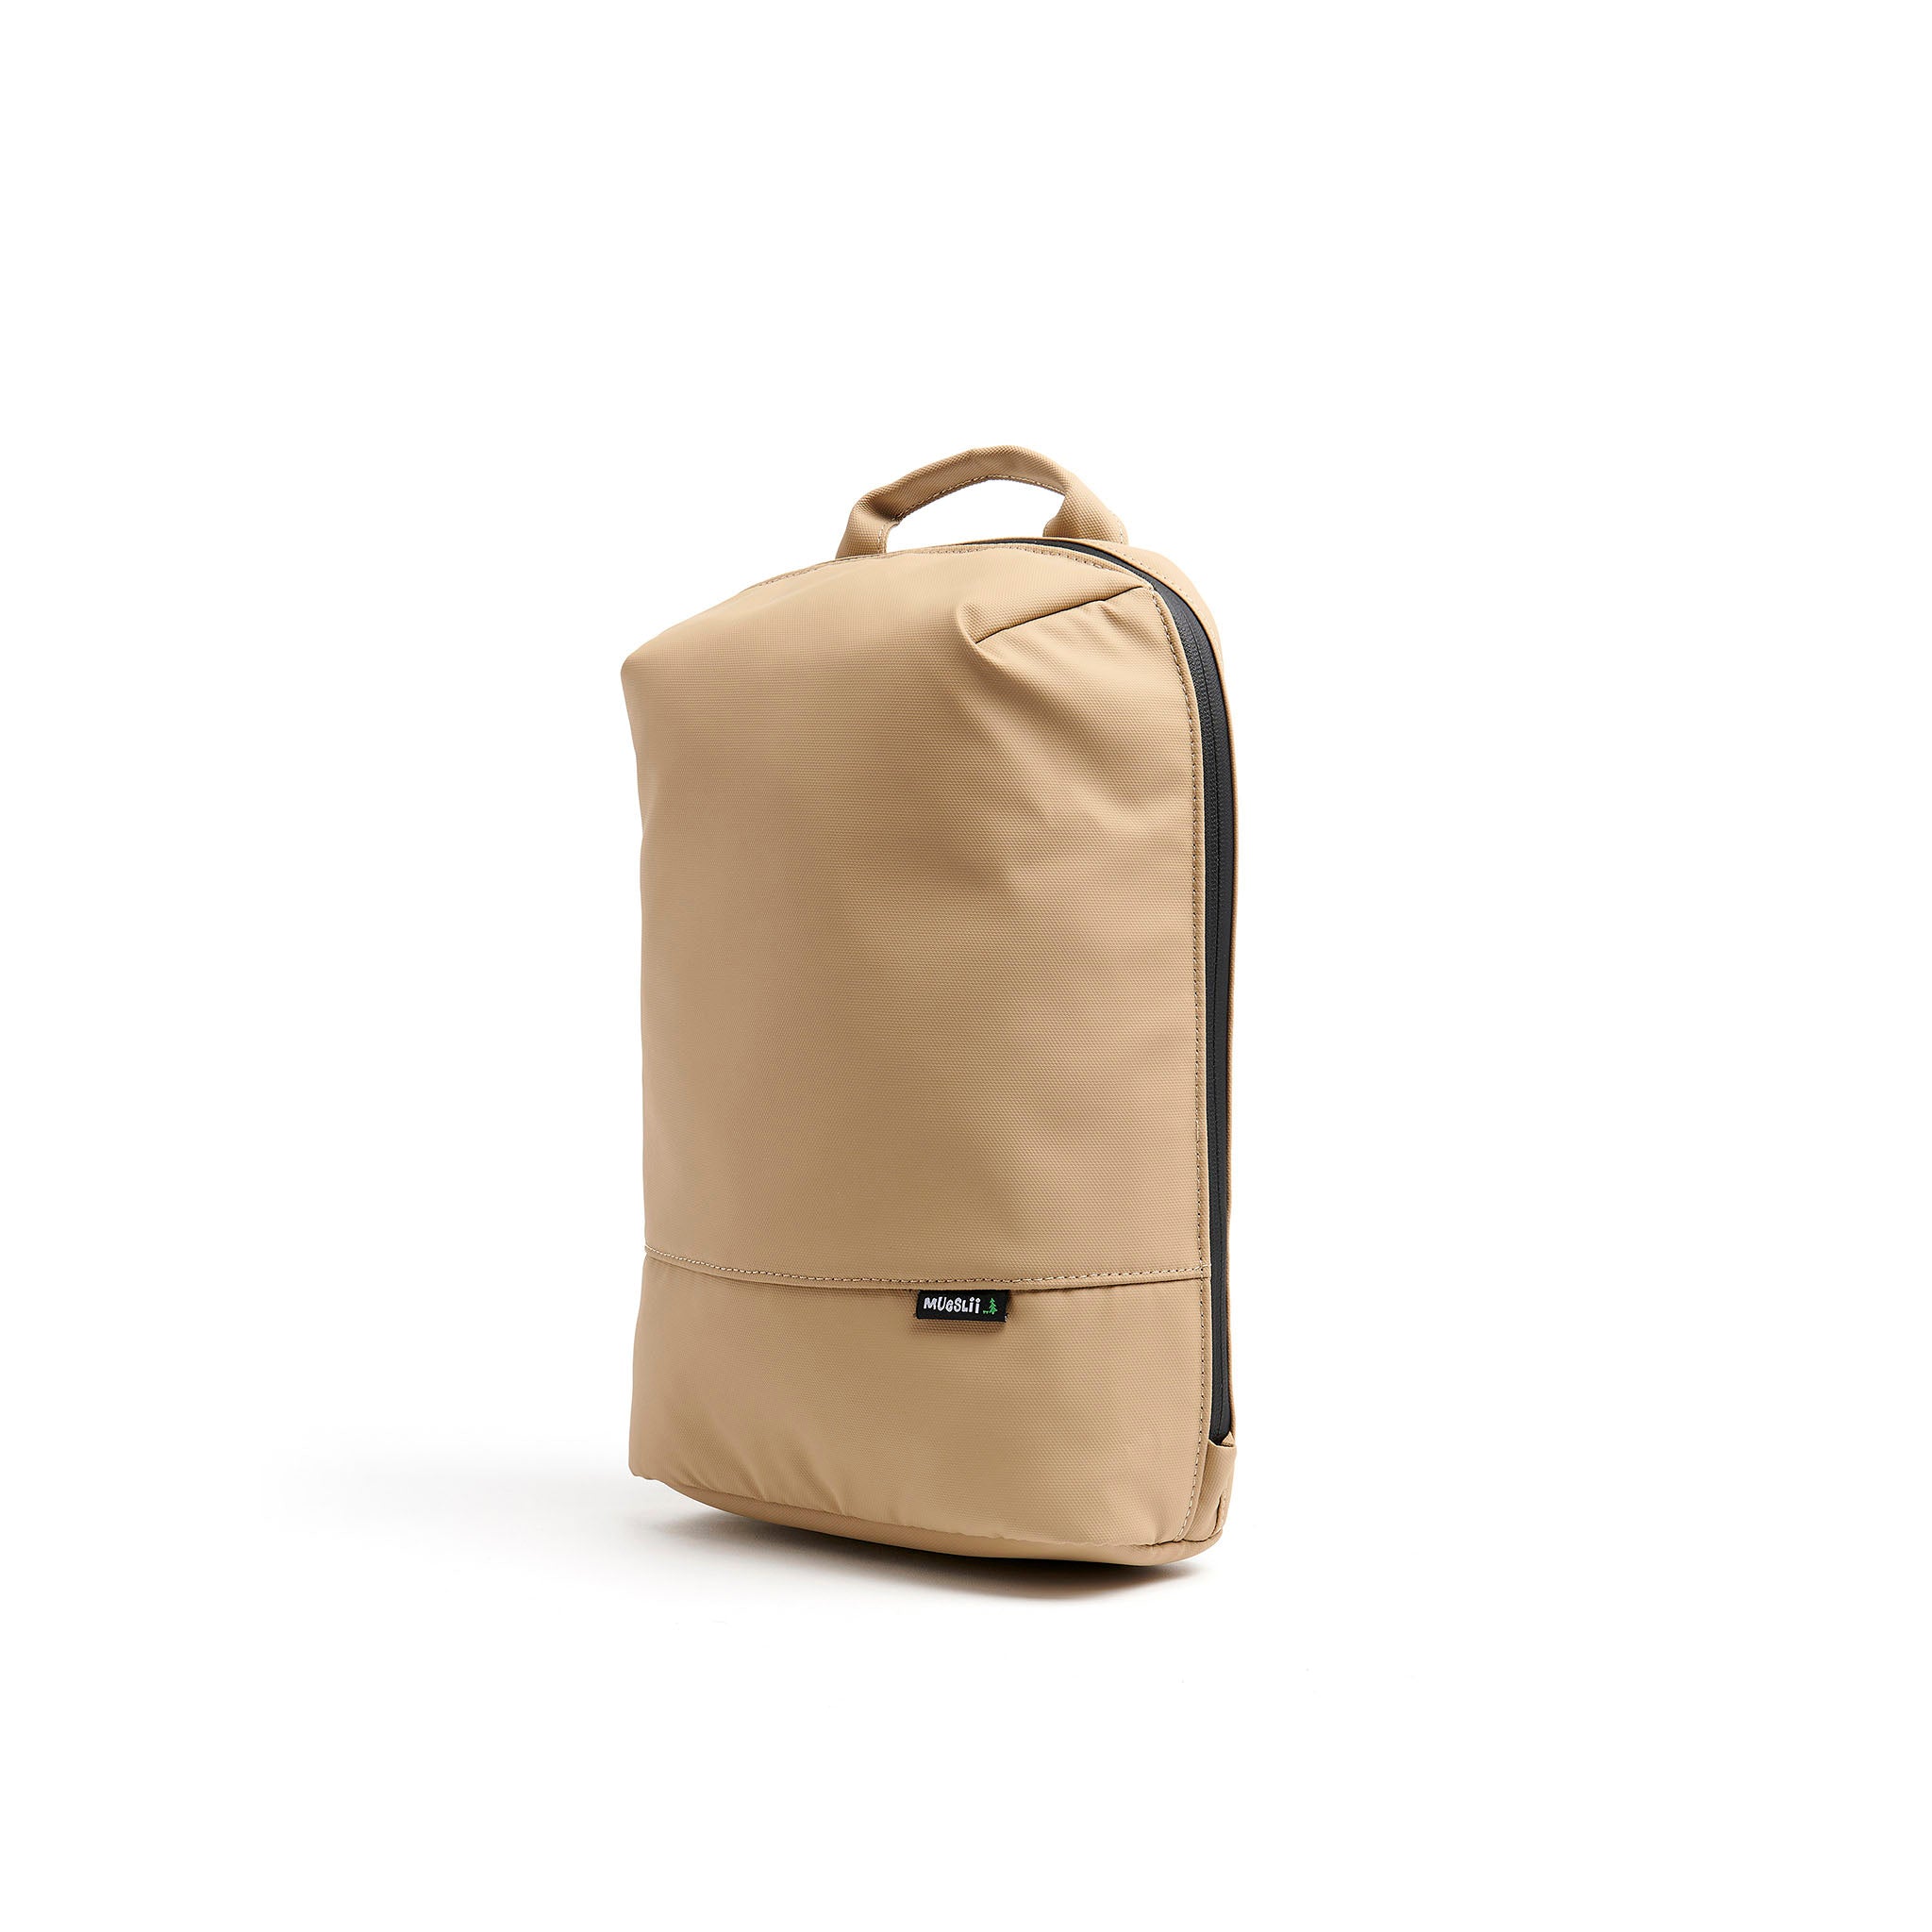 Mueslii small backpack, made of PU coated waterproof nylon, with a laptop compartment, color sand, side view.